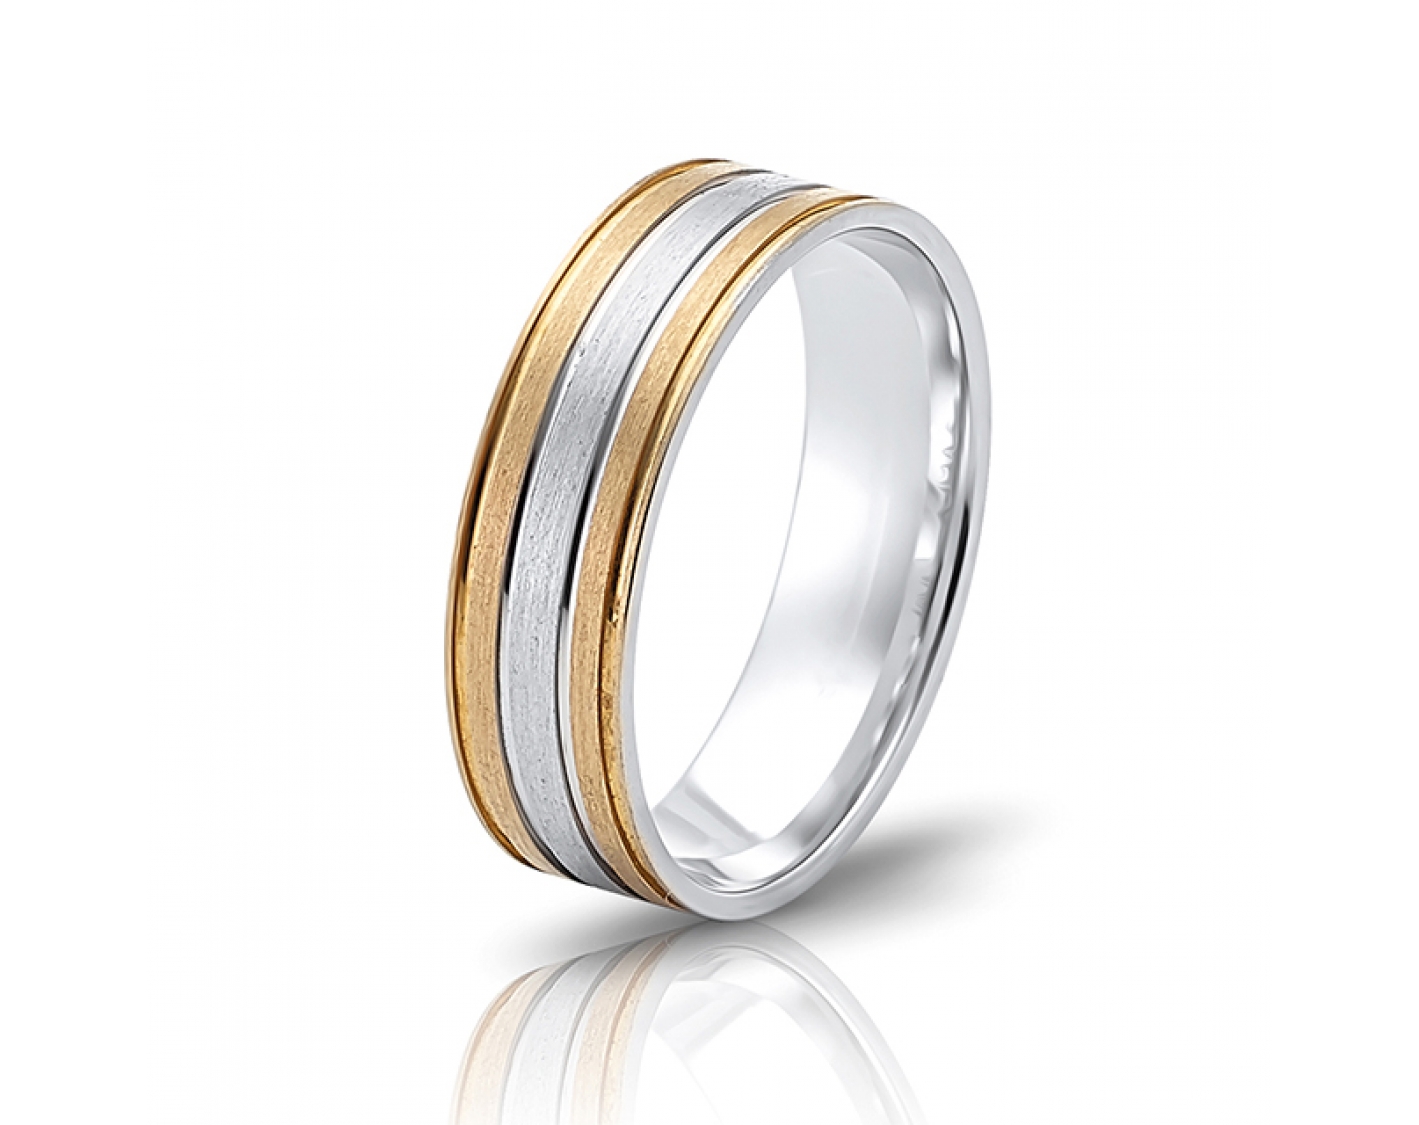 dual-tone 6mm two-toned* wedding band Photos & images